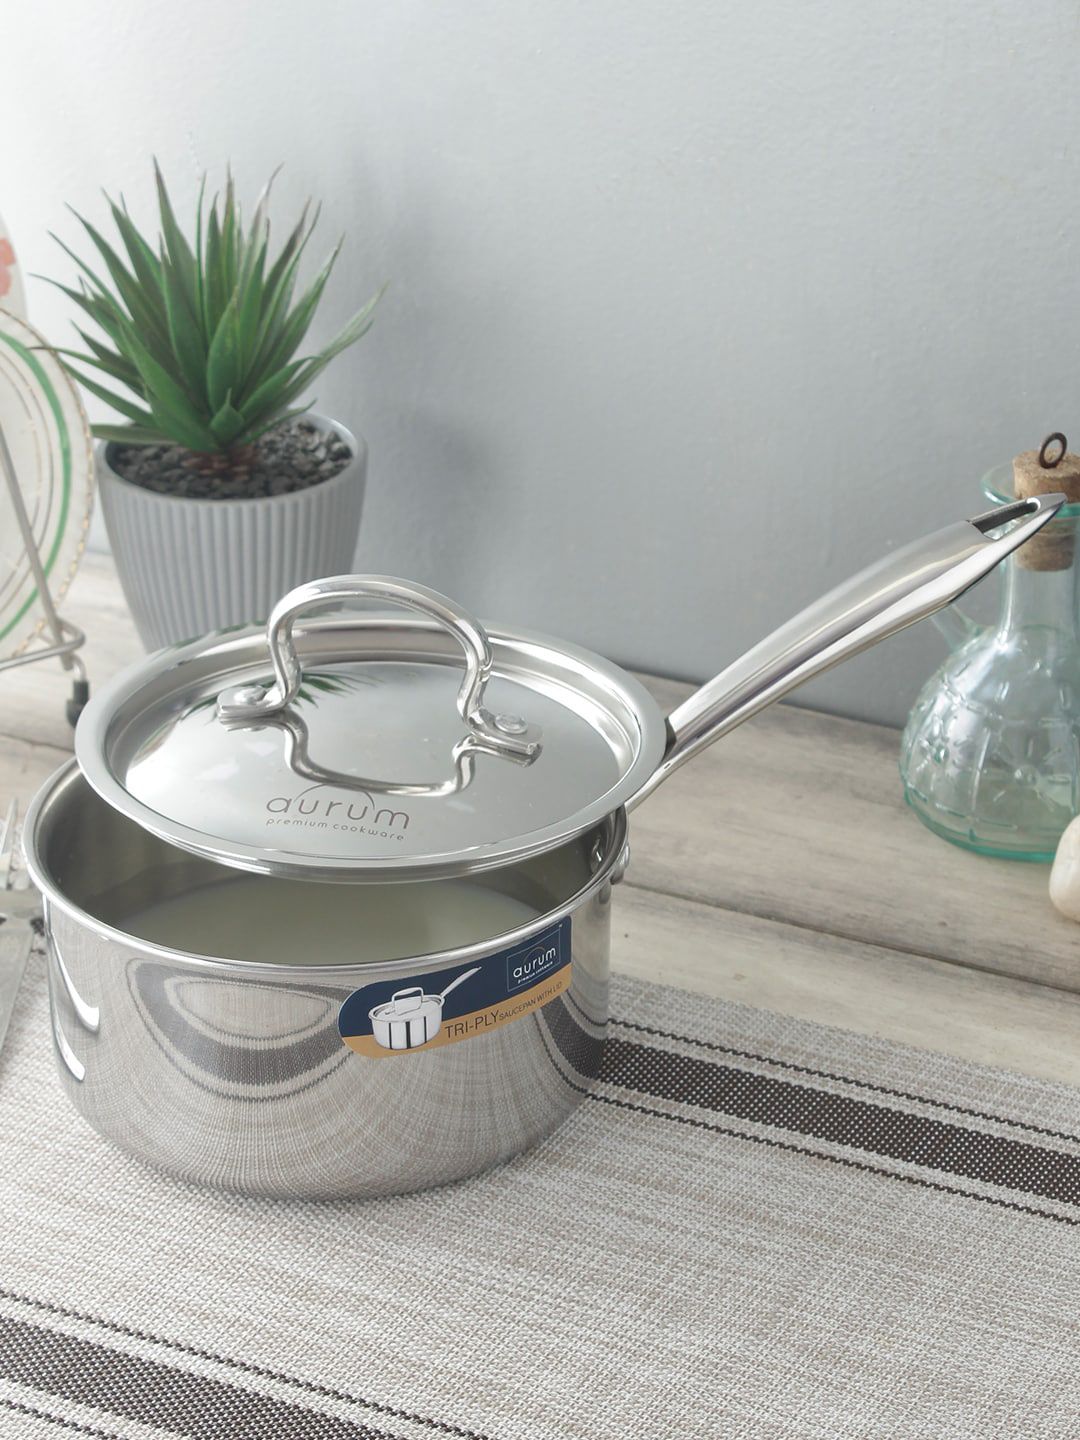 AURUM Silver-Toned Triply Stainless Steel Saucepan with Lid 2.2 Litre Price in India